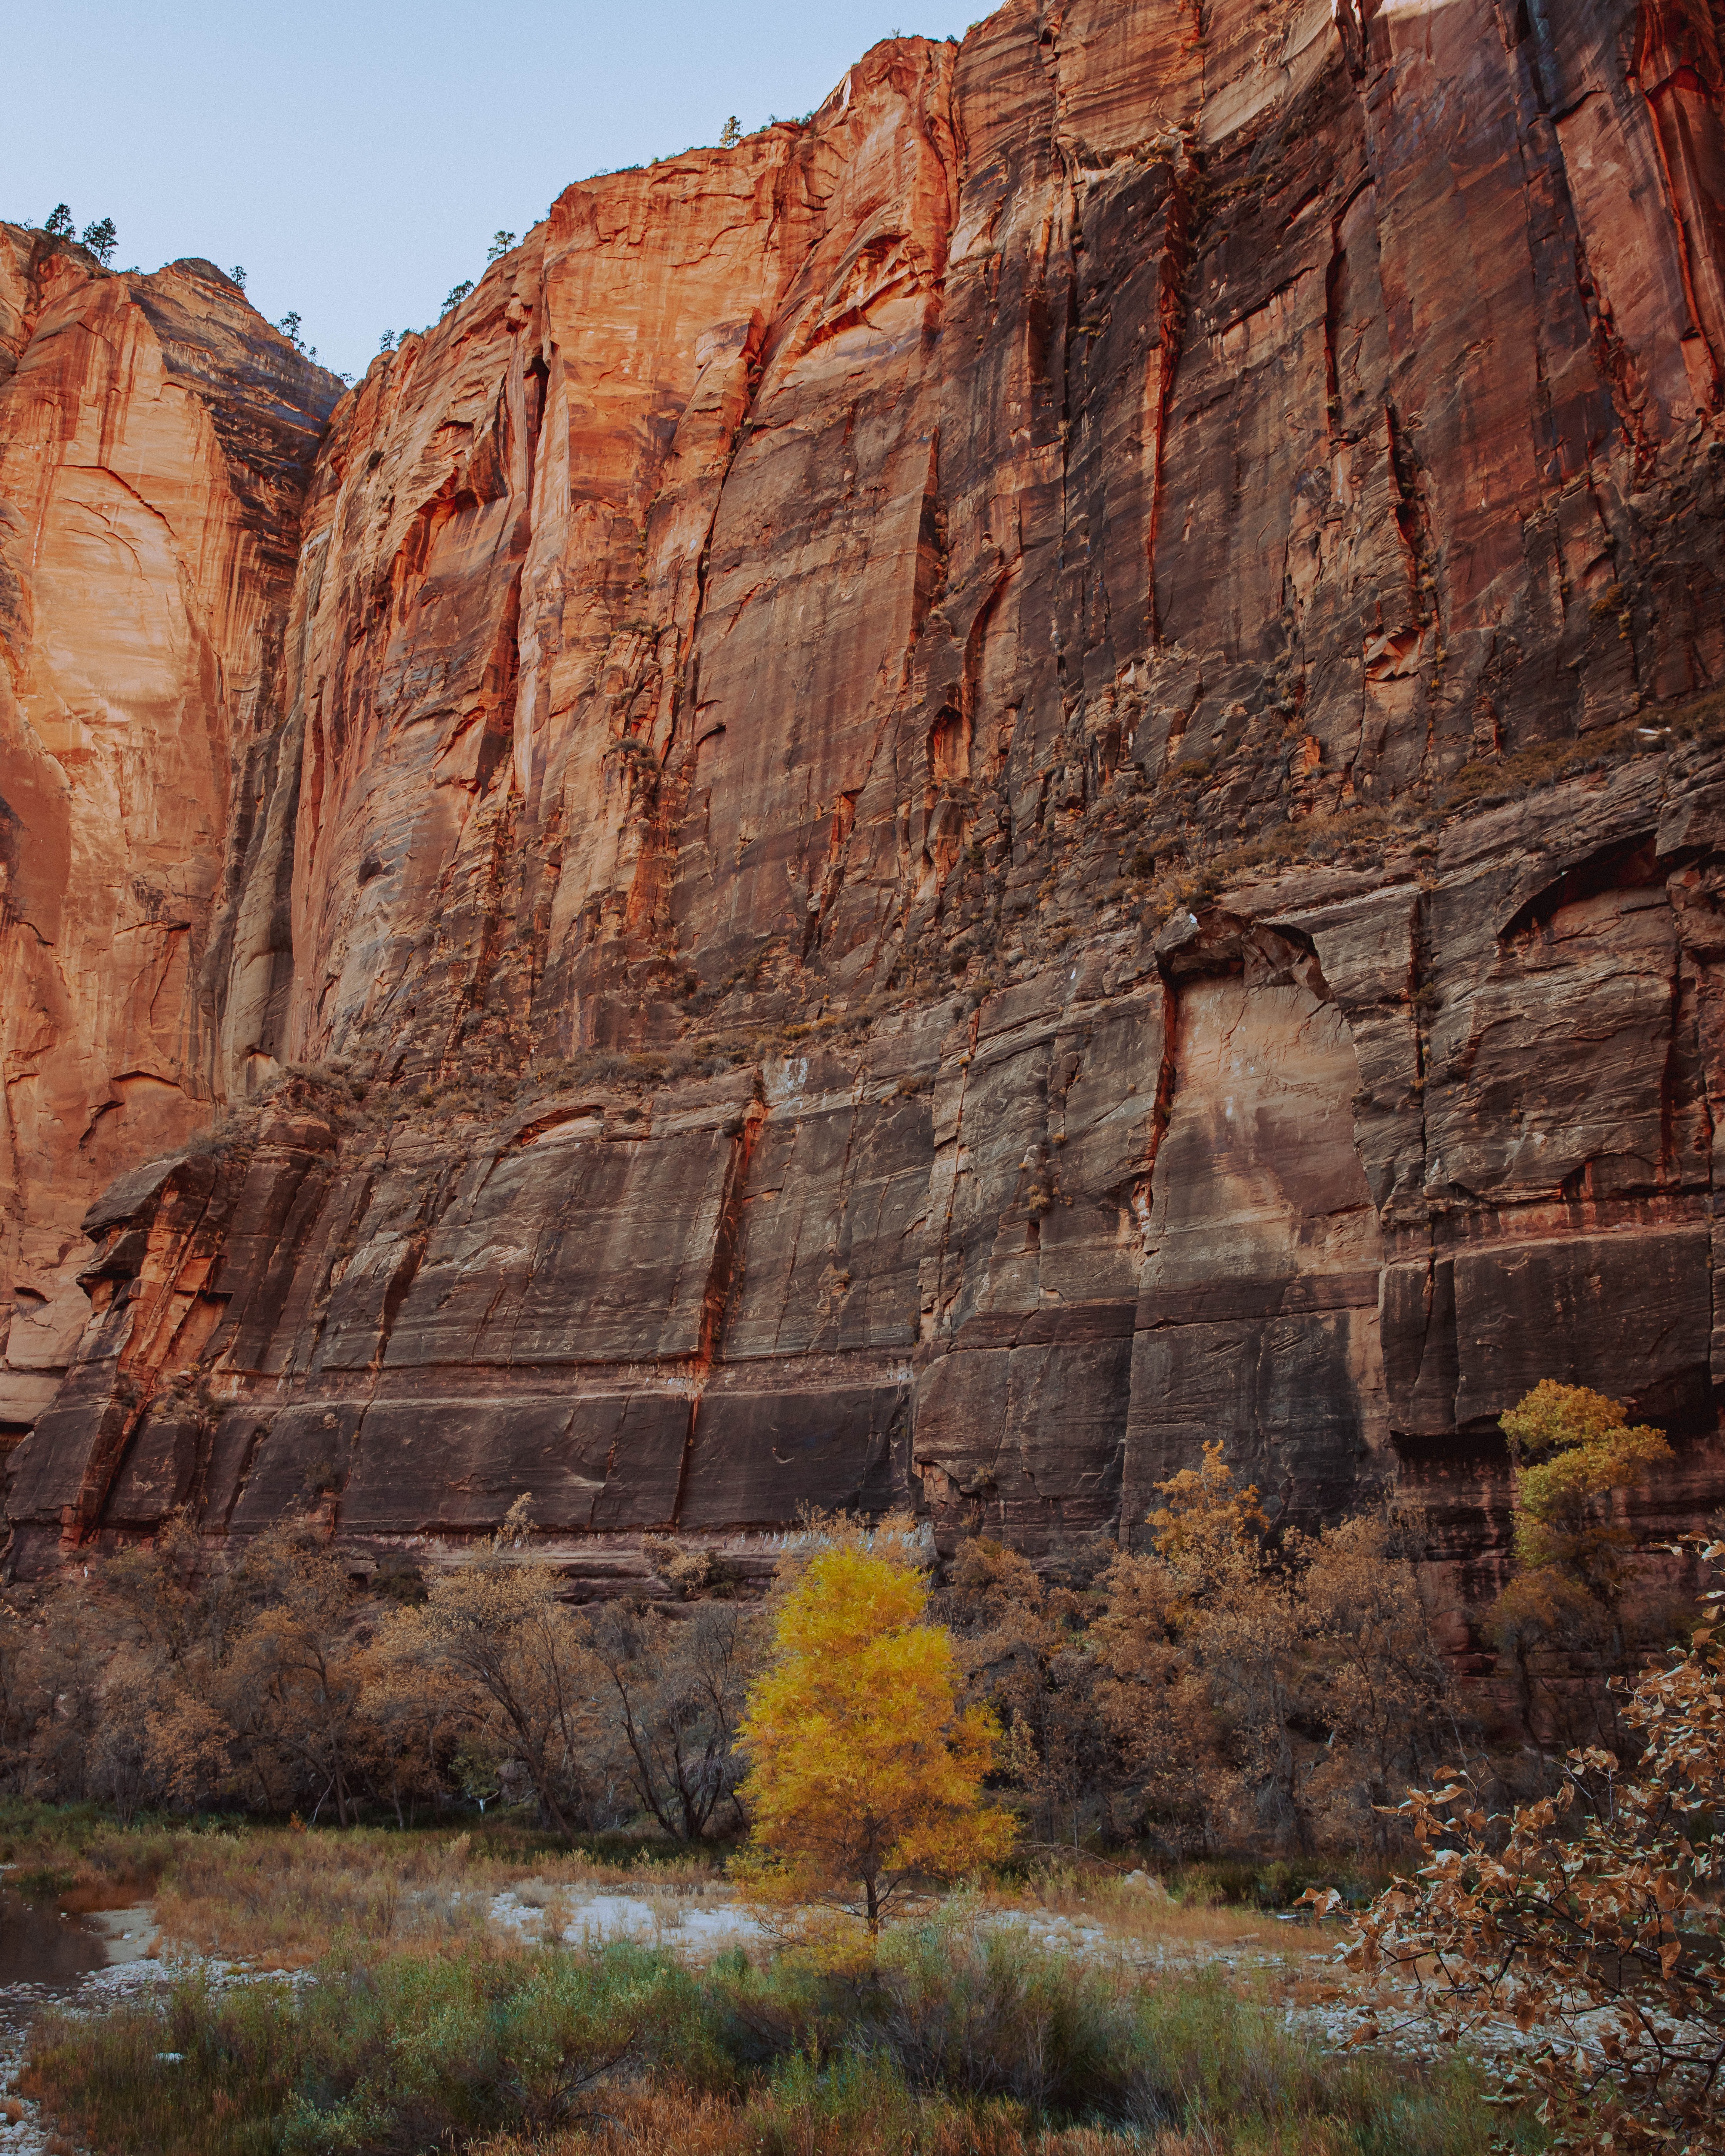 Big walls on Zion National Park